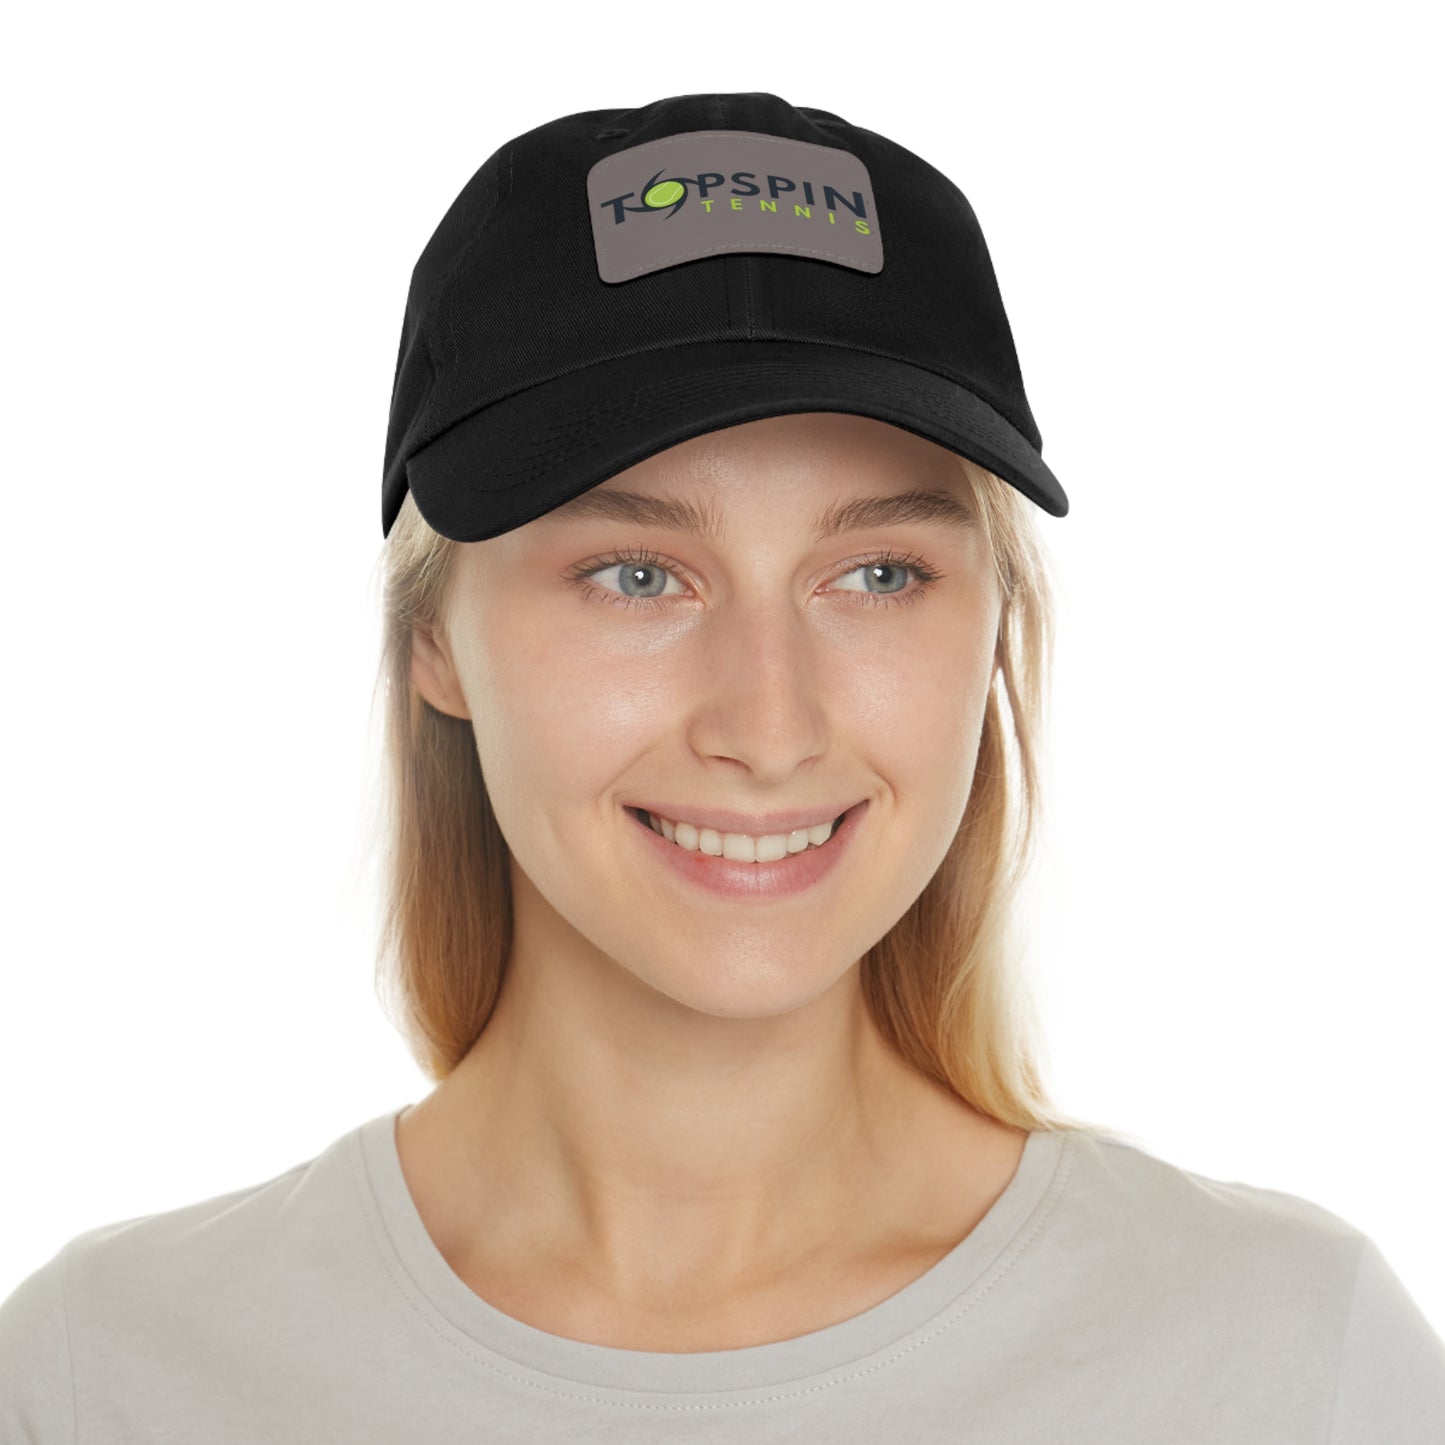 Topspin Tennis Baseball Cap with Leather Patch